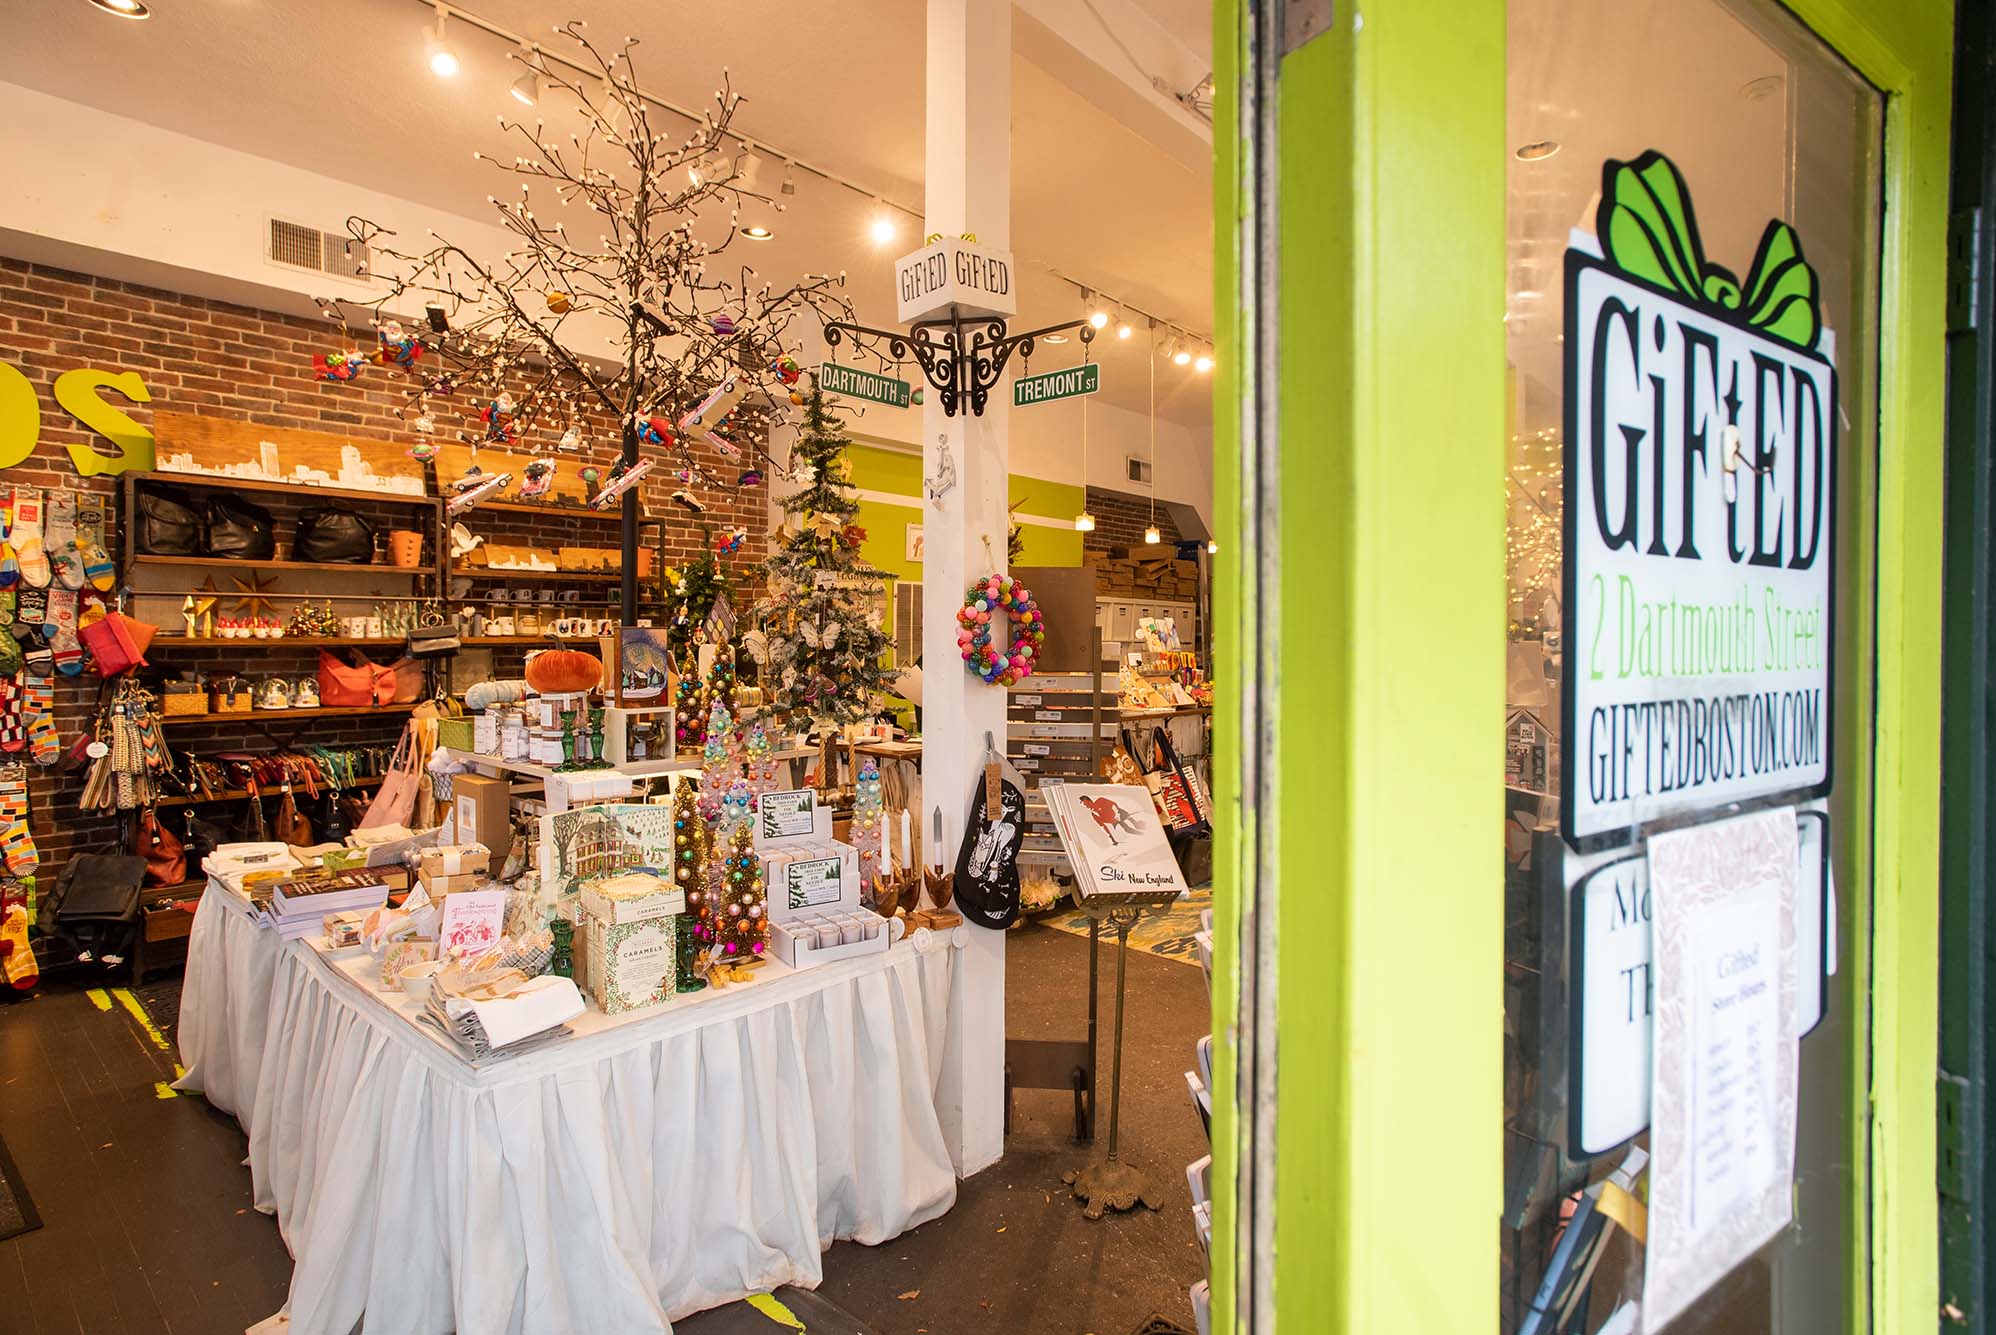 Photo: A peek into the Gifted Store in Boston. Front door sign reads "Gifted" and an interior filled with tables, fairy lights, and various boutique gifts are on display.